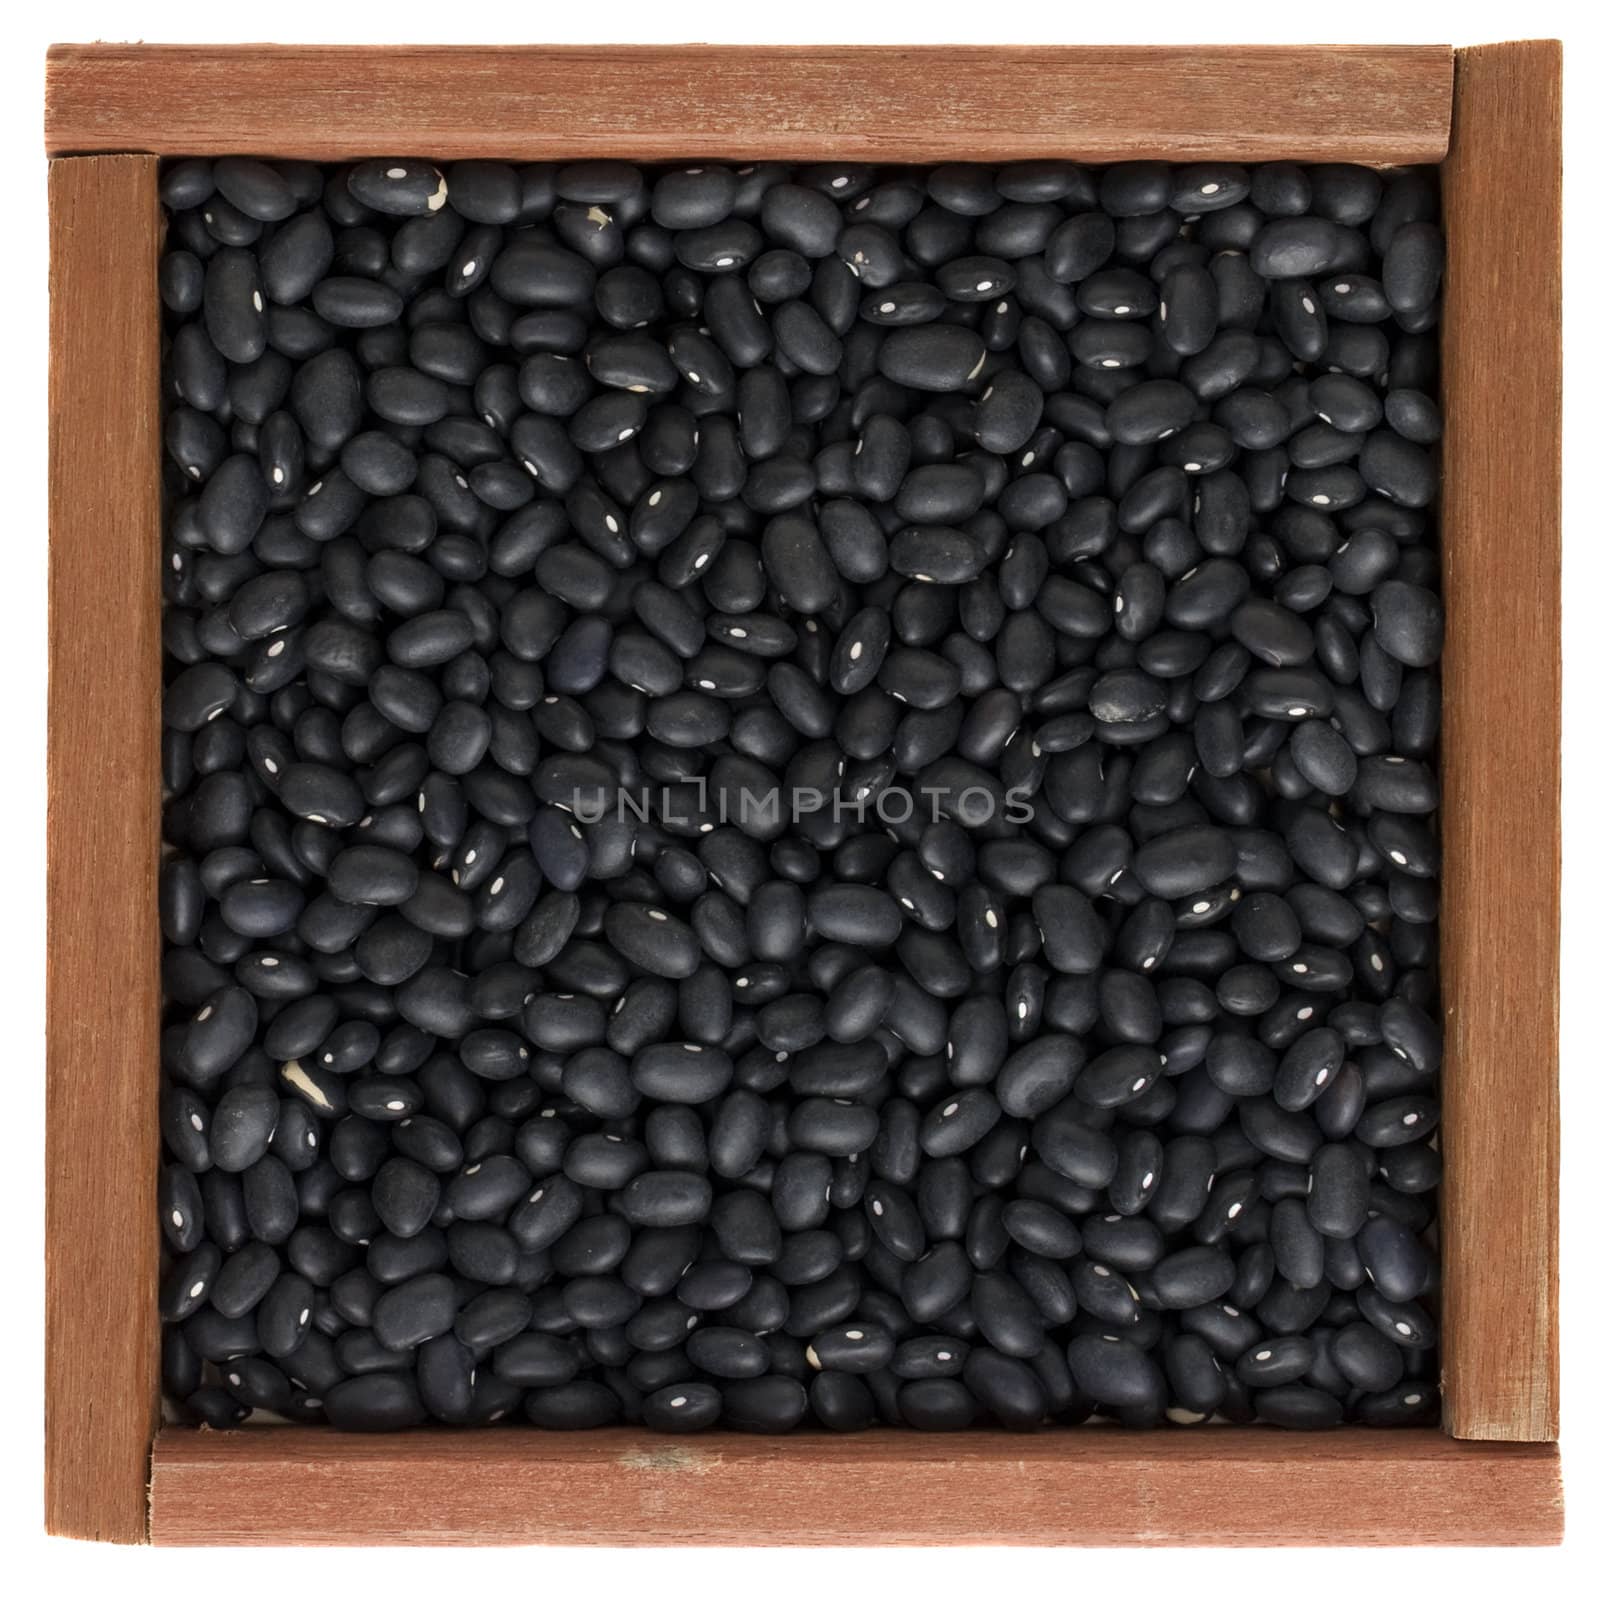 black turtle beans in a wooden box by PixelsAway